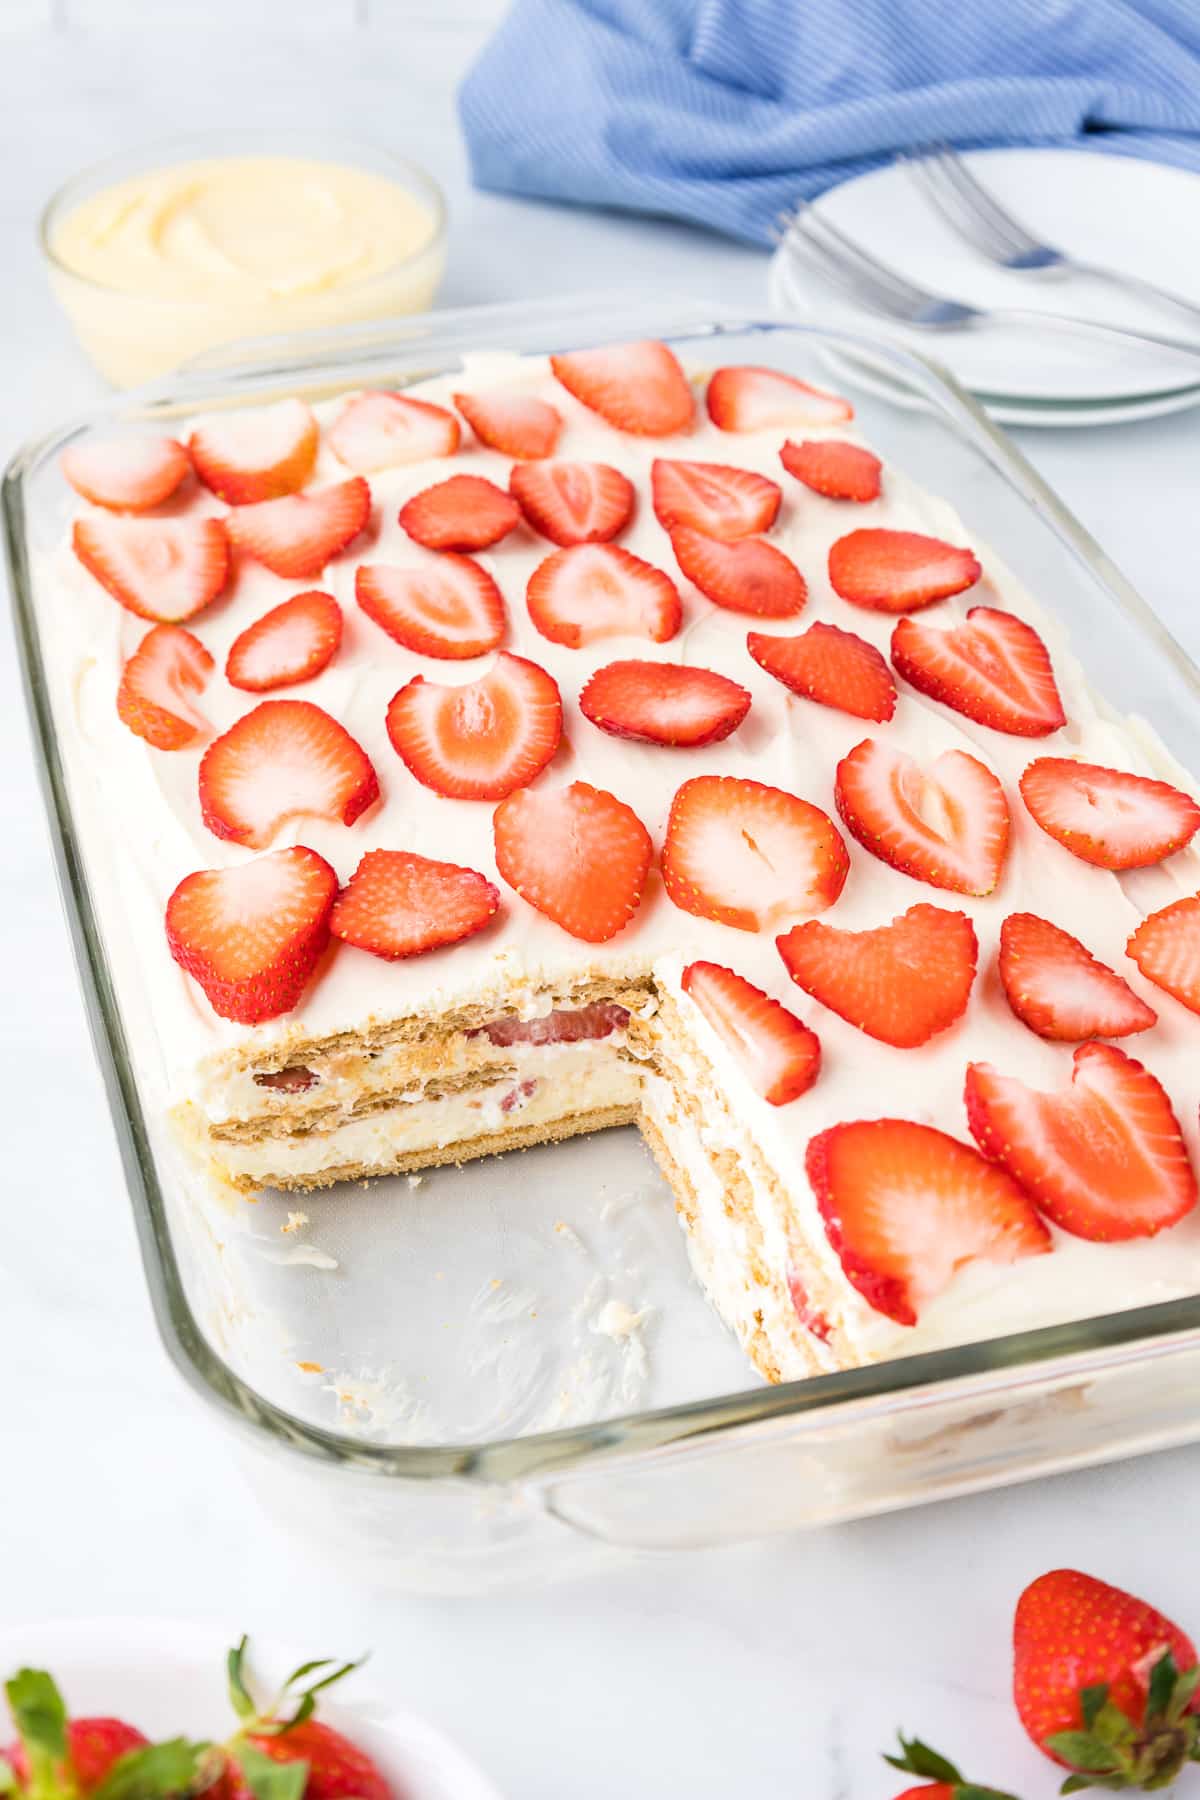 An entire pan of strawberry cream cheese icebox cake with an angled view missing a slice allowing you to see the layers in the cake.